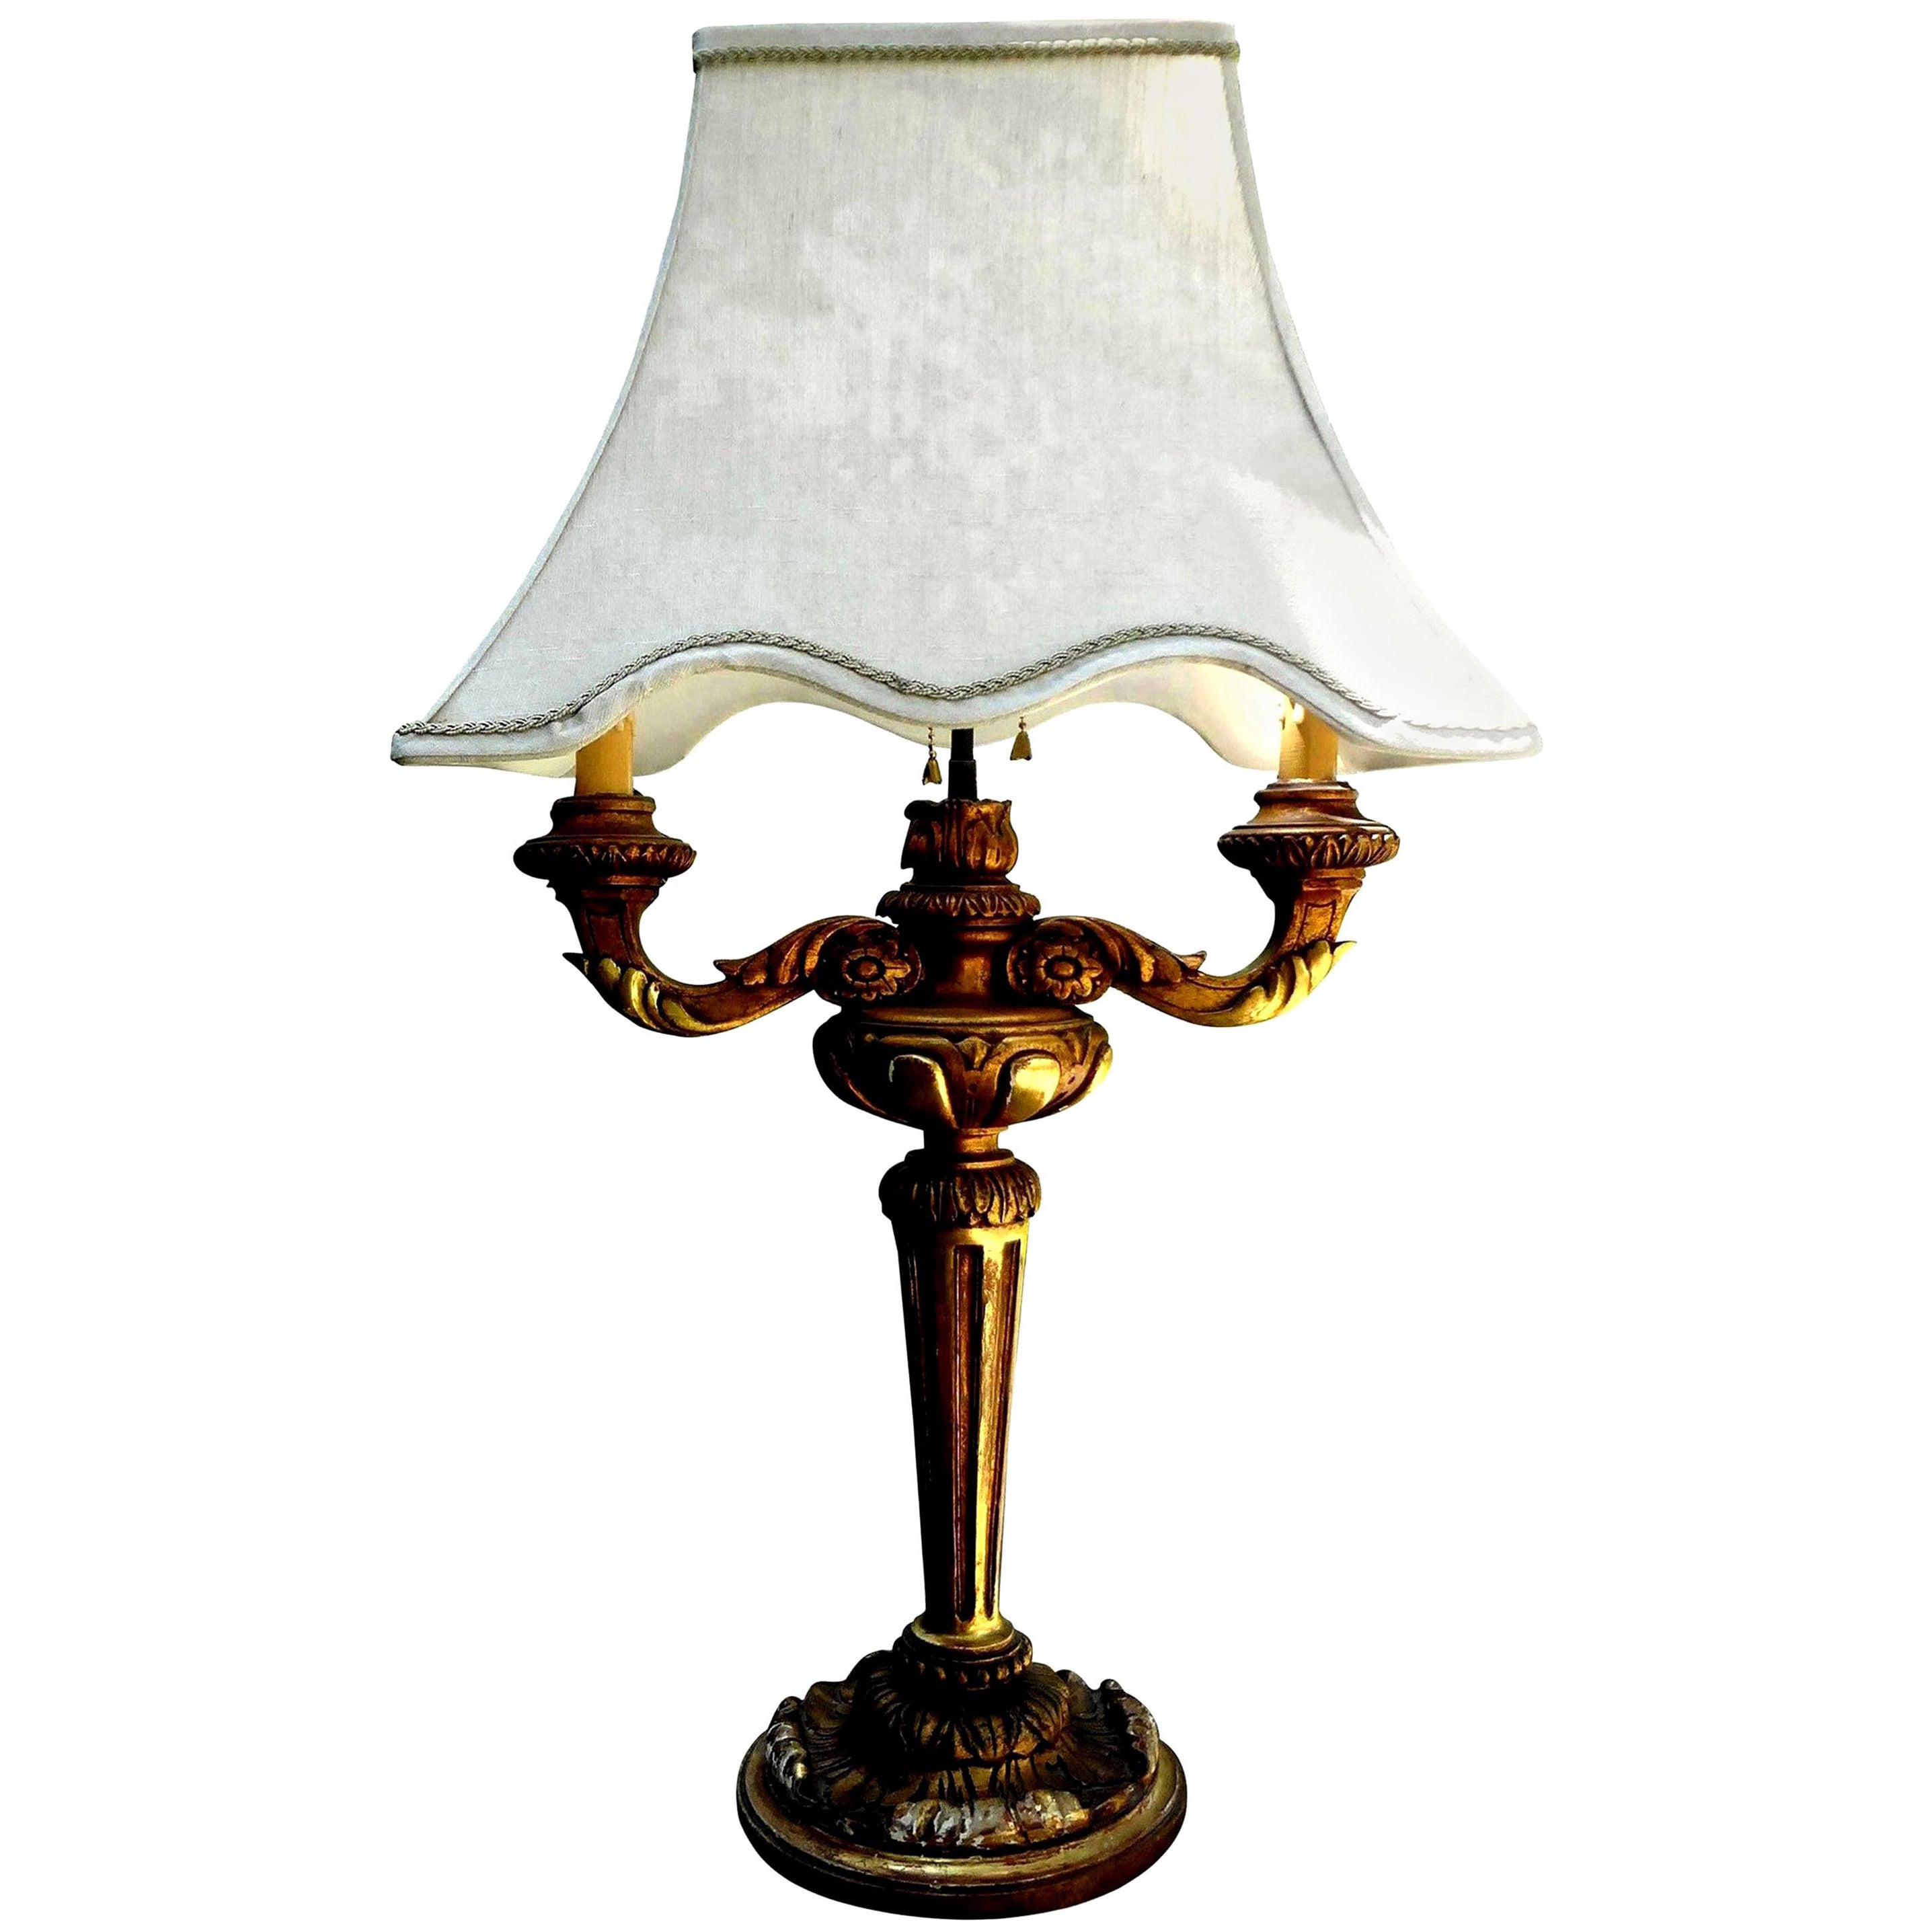 Antique Italian Giltwood Lamp For Sale